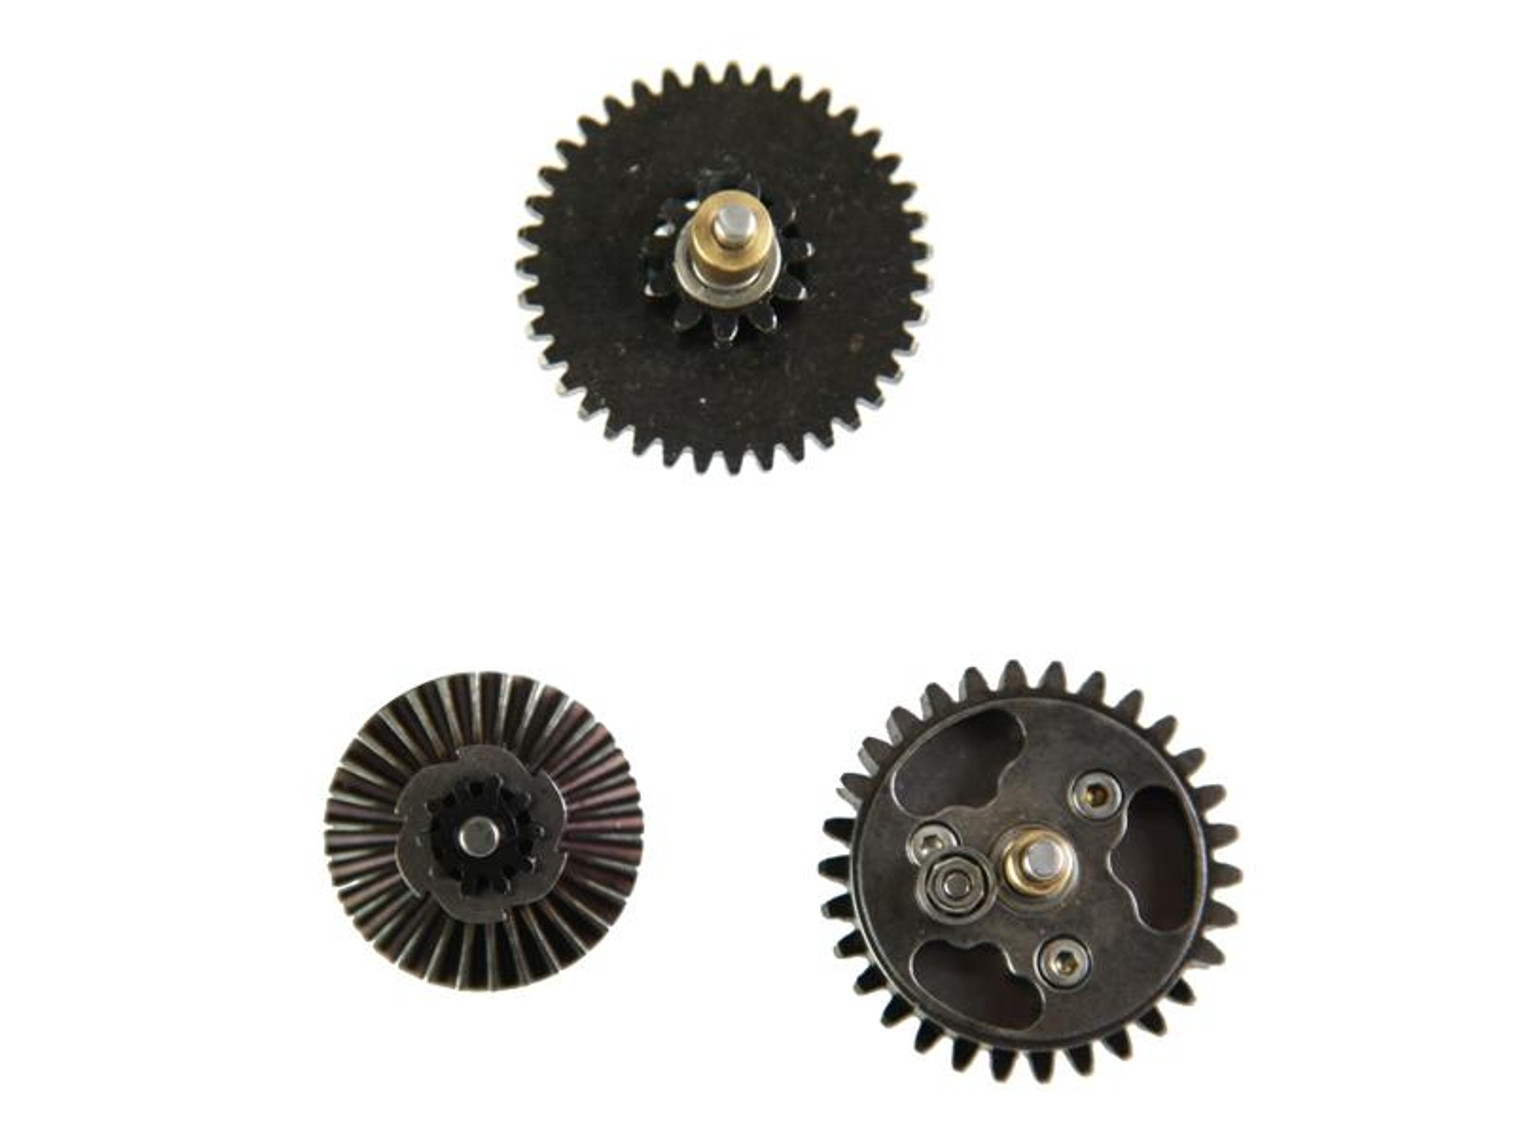 Super Shooter CNC 32:1 Torque Up Gear Set - 1/2 Tooth Piston Required